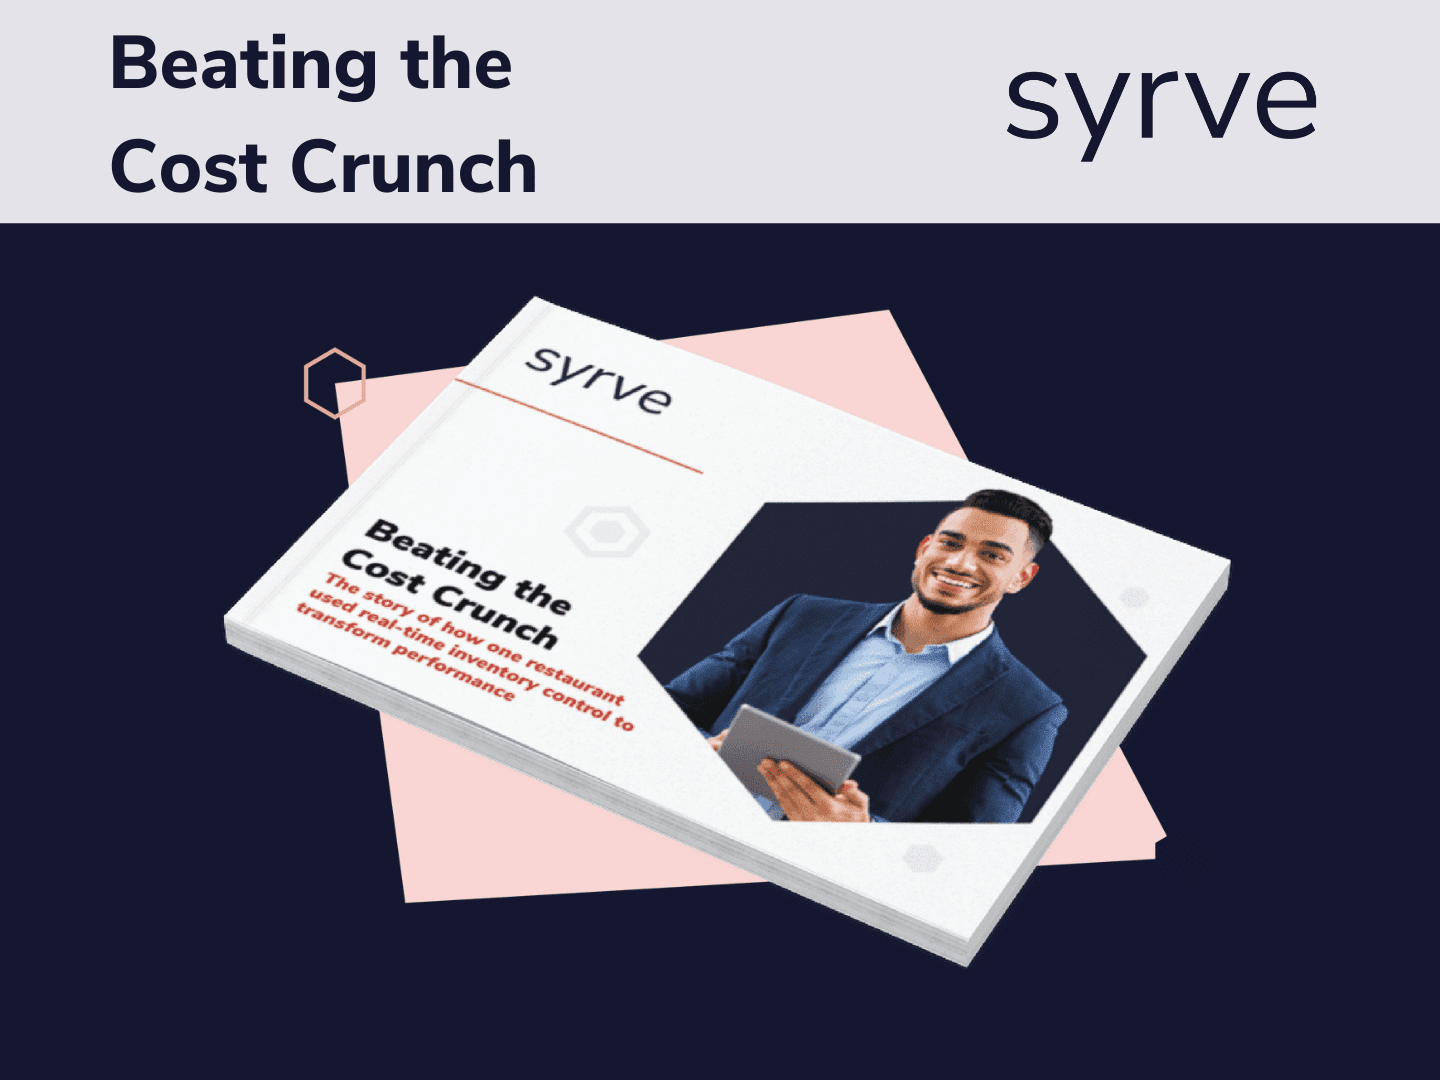 Beating the Cost Crunch